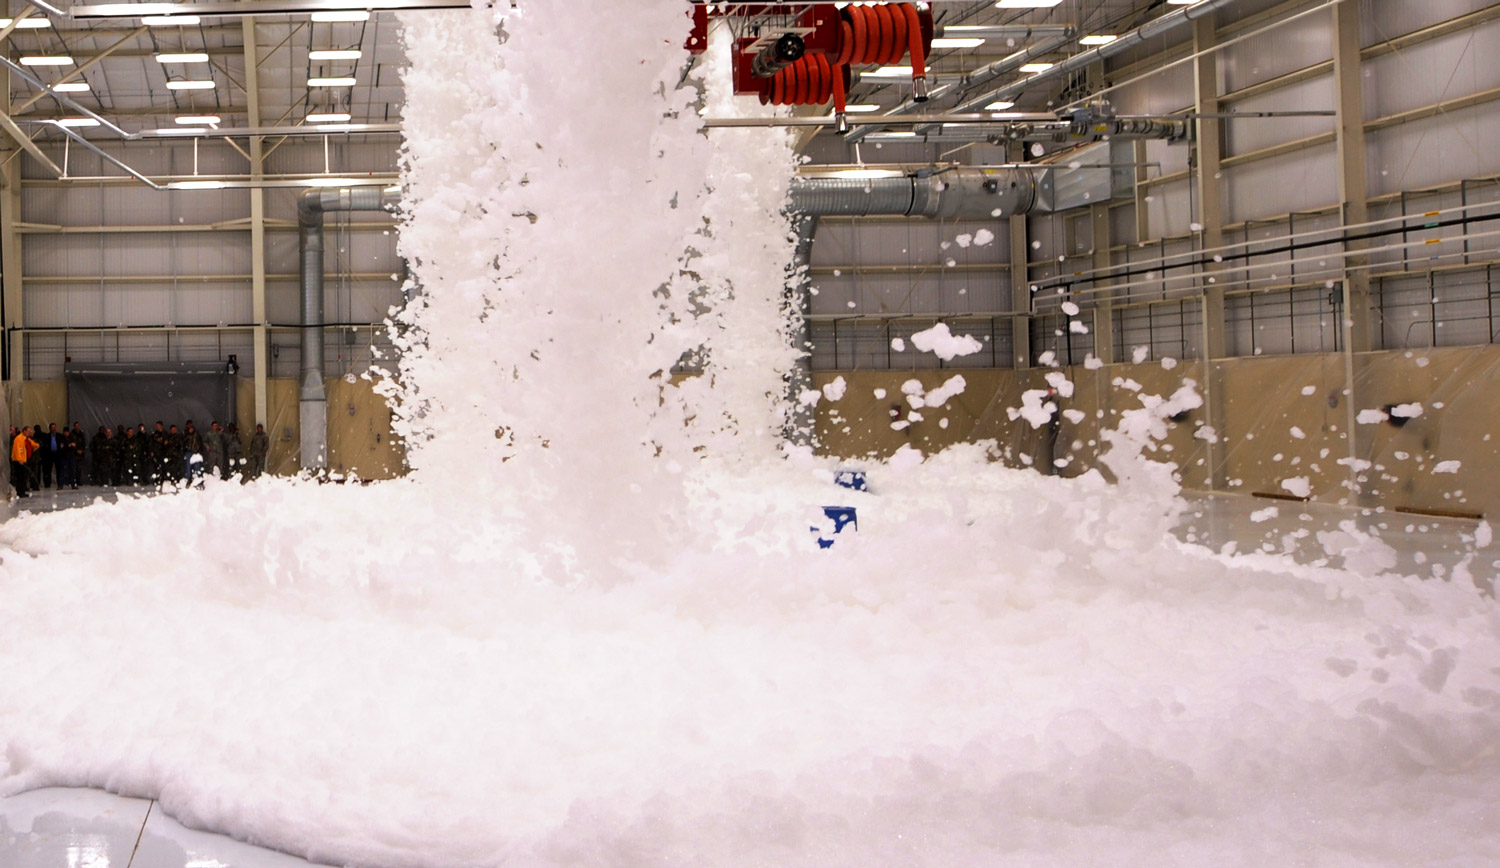 Replace any non-persistent firefighting foam with F3 foam